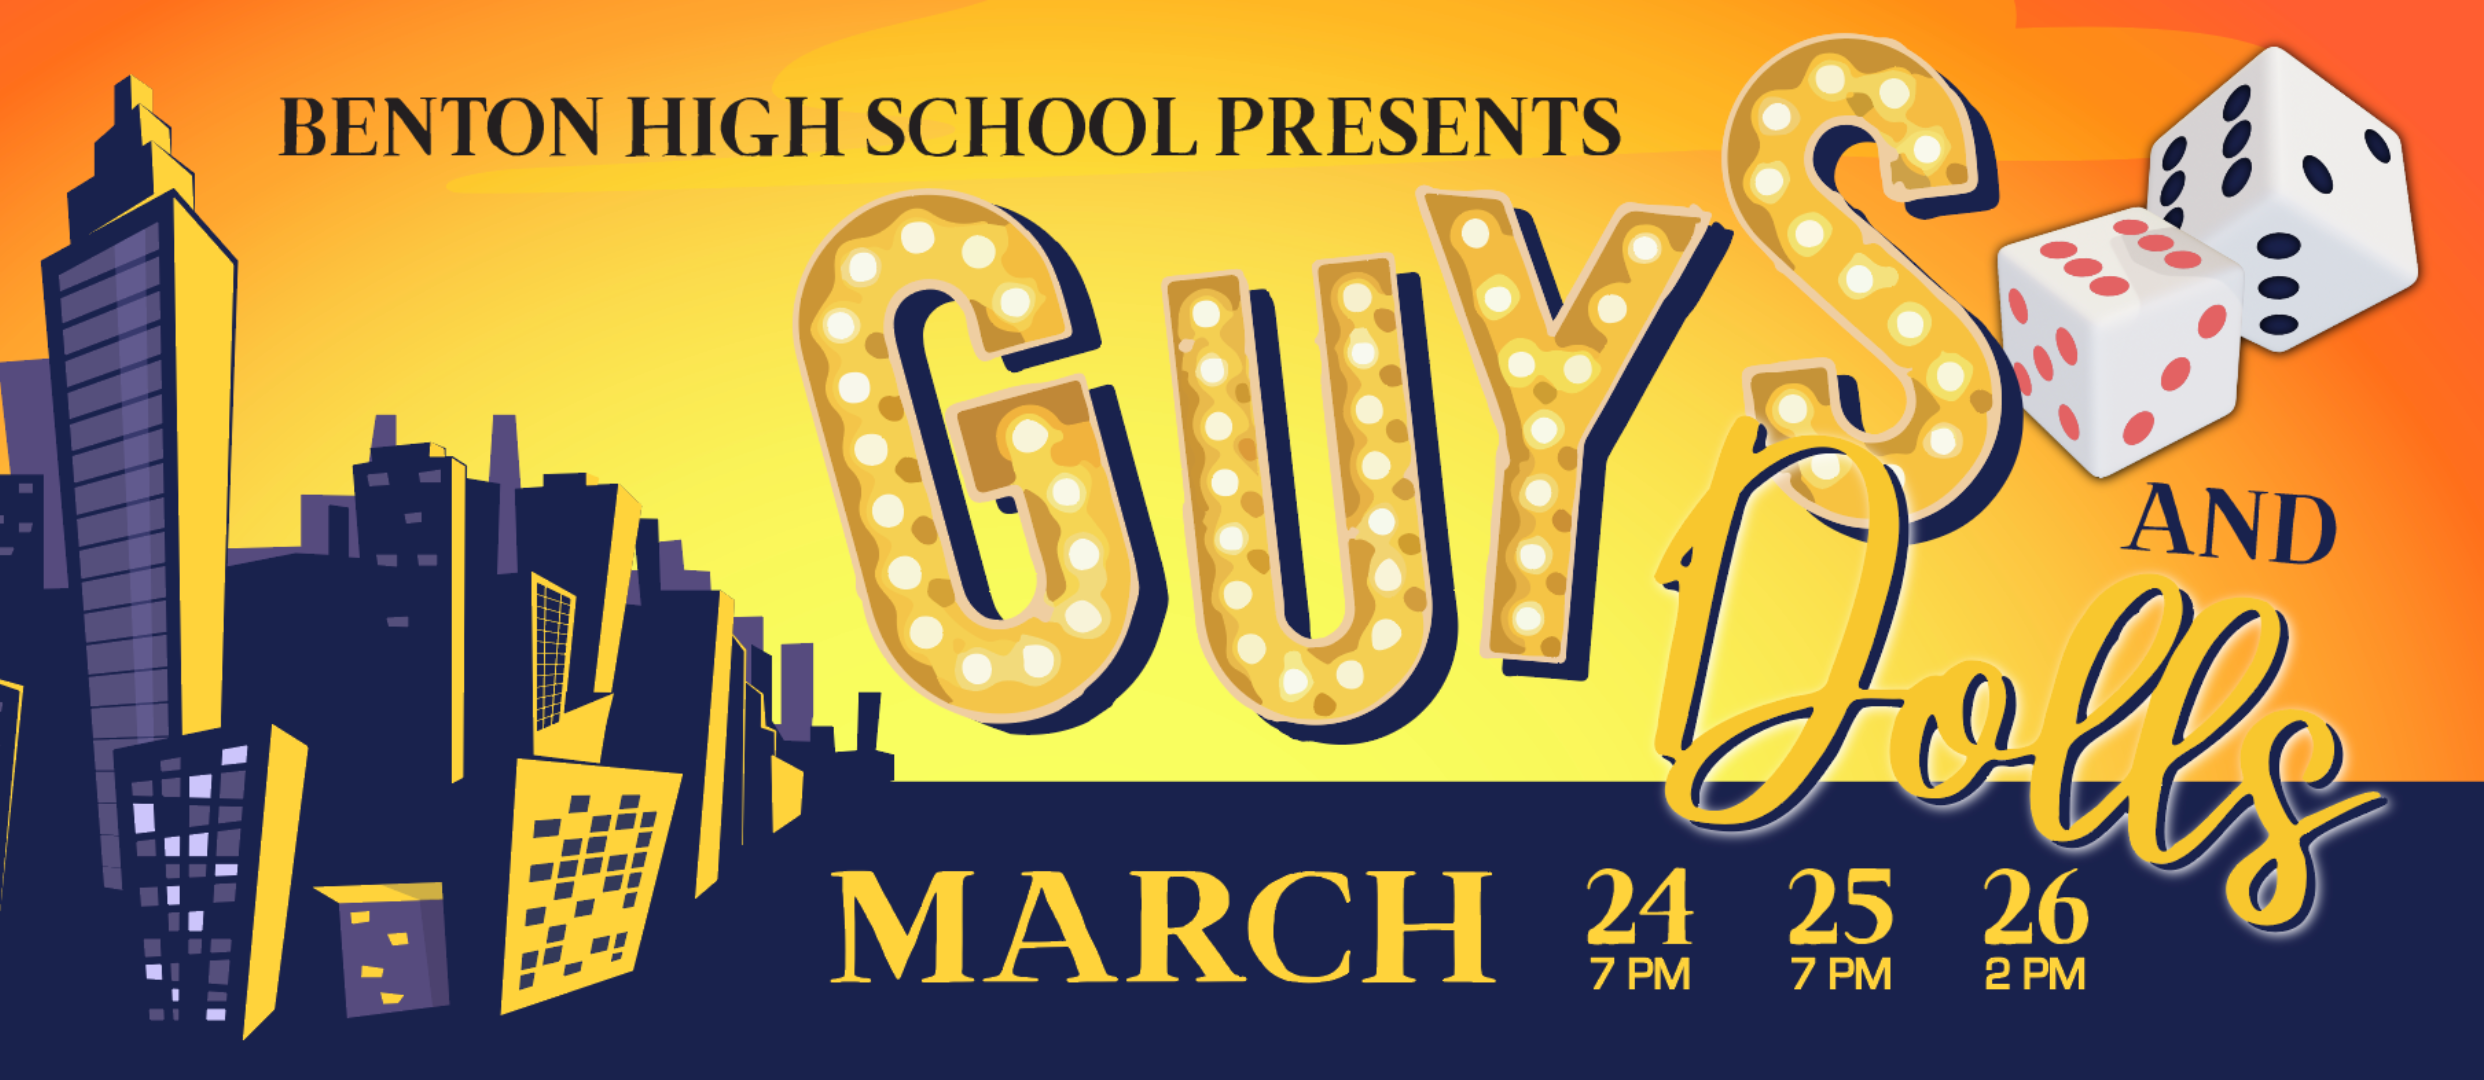 Benton High School Present - Guys and Dolls - March 24th and 25th at 7pm and 26th at 2pm.